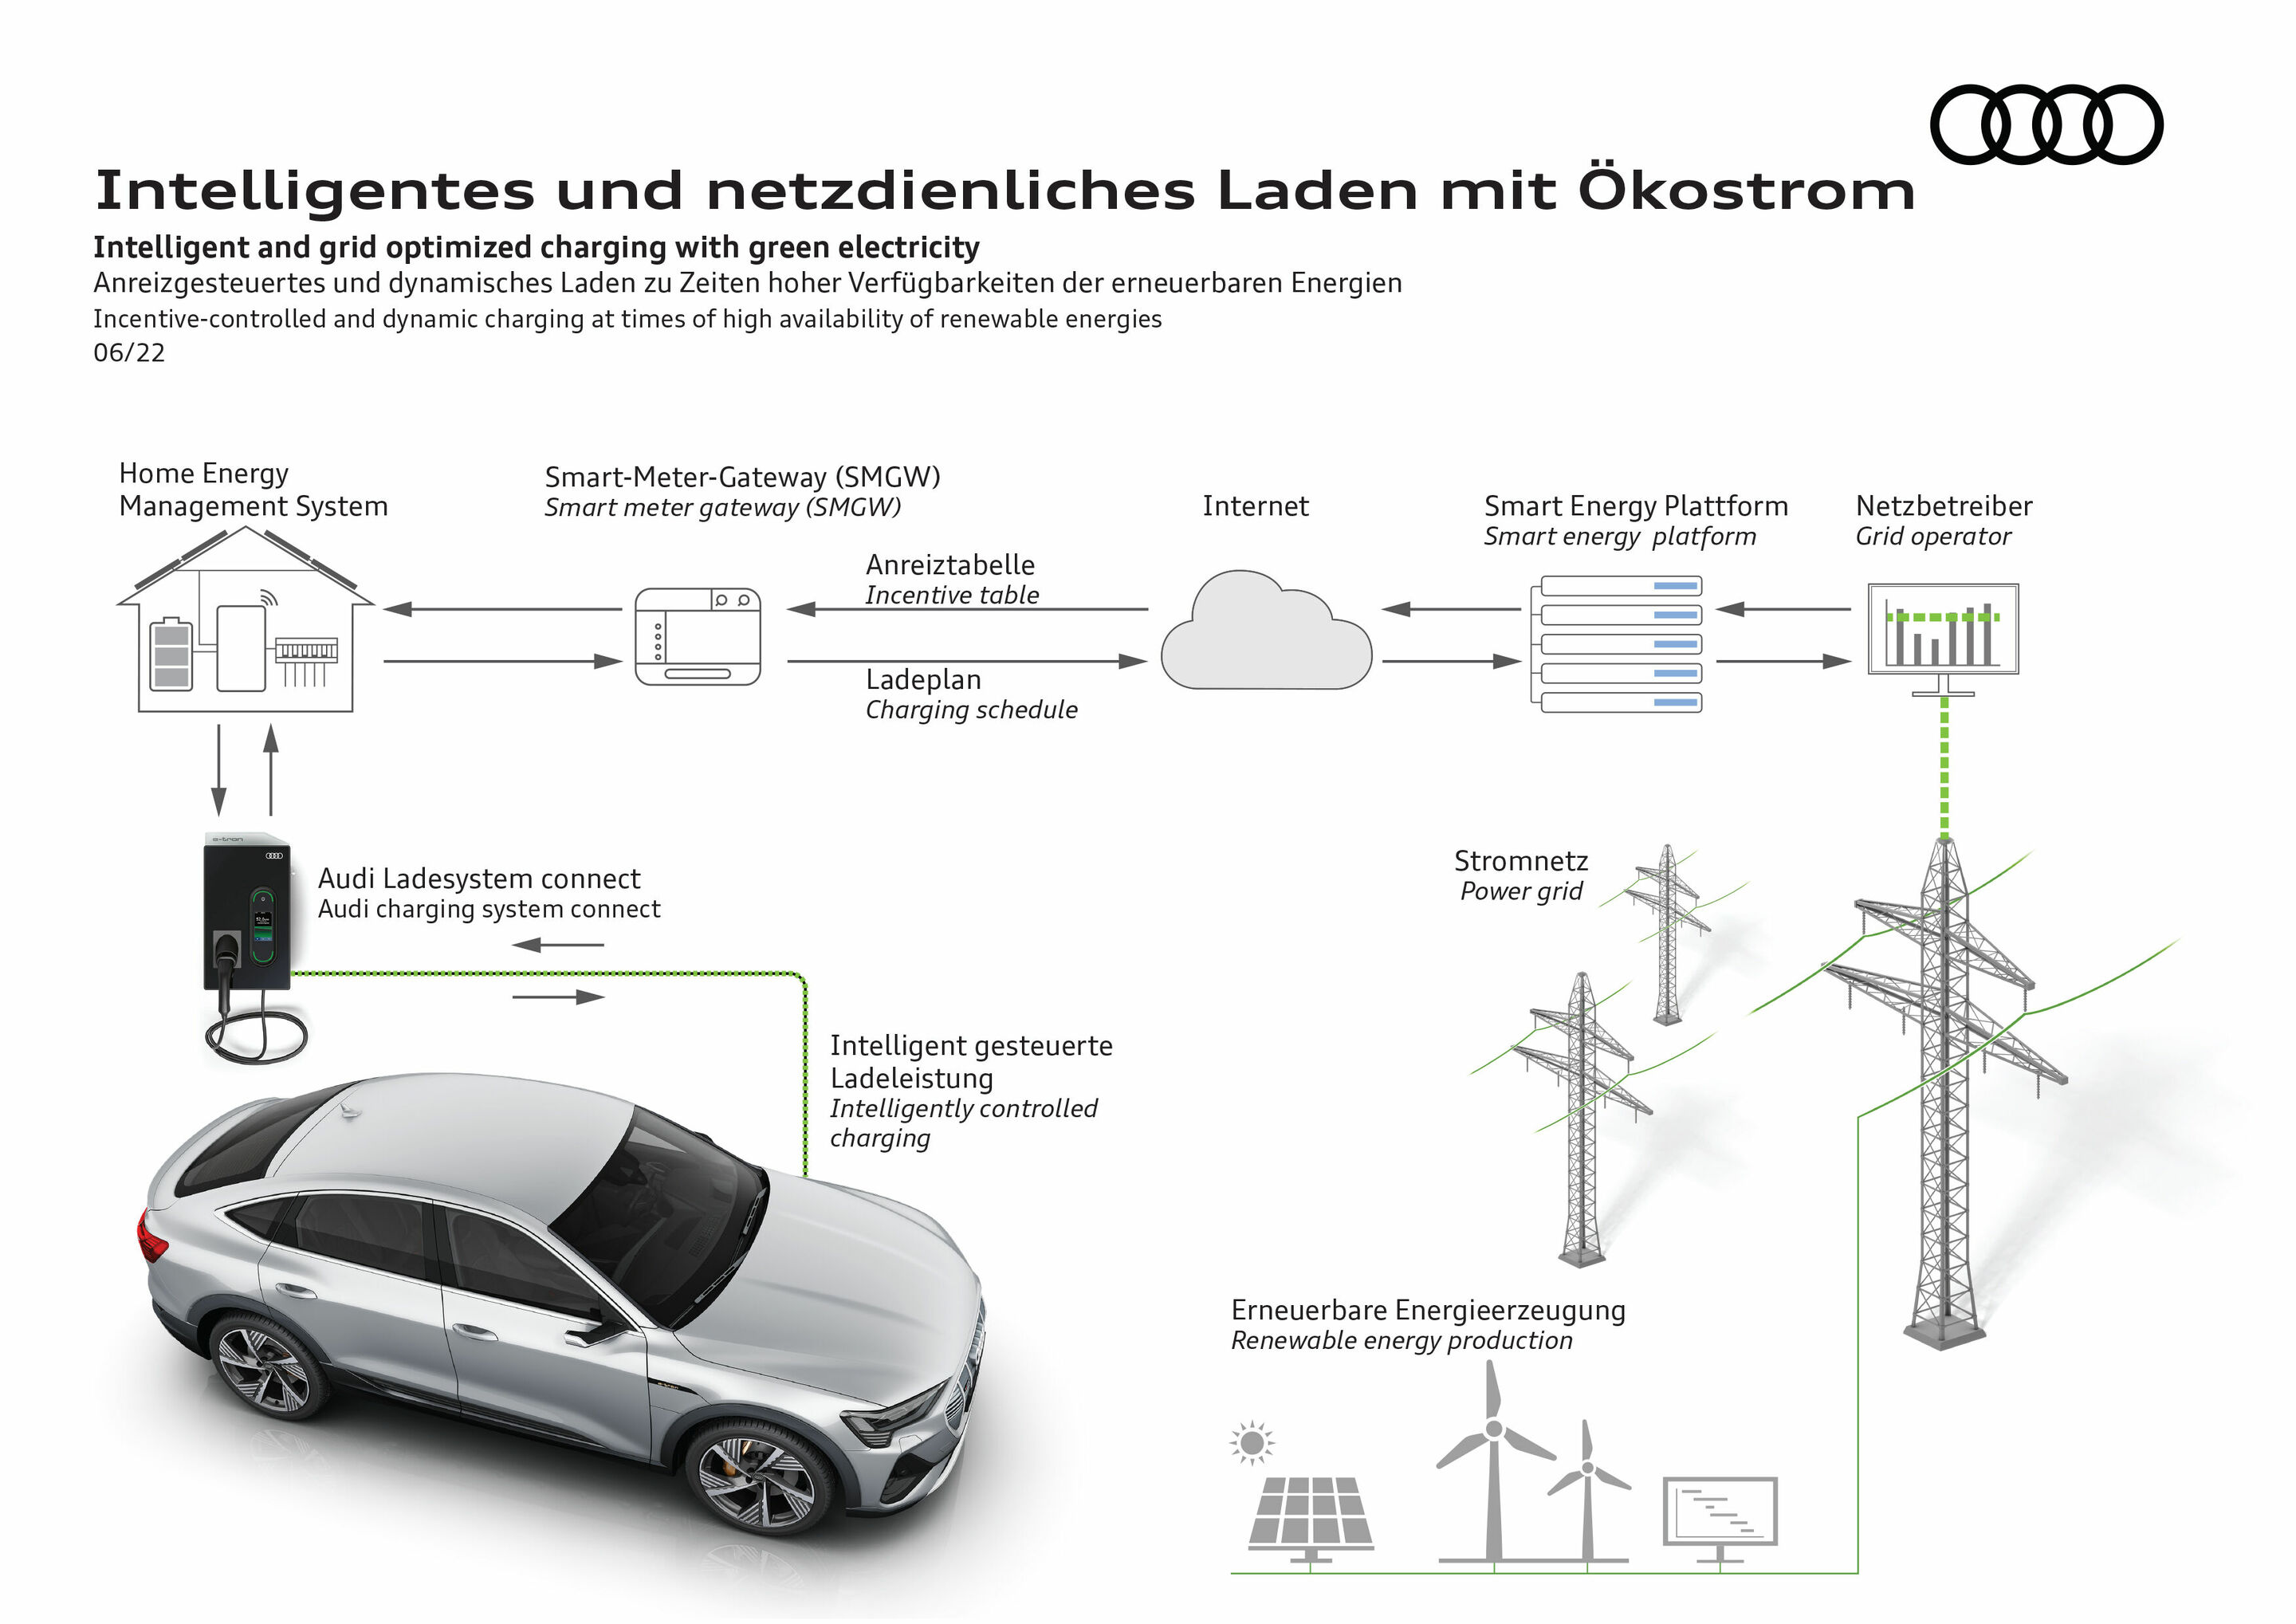 Intelligent and grid optimized charging with green electricity